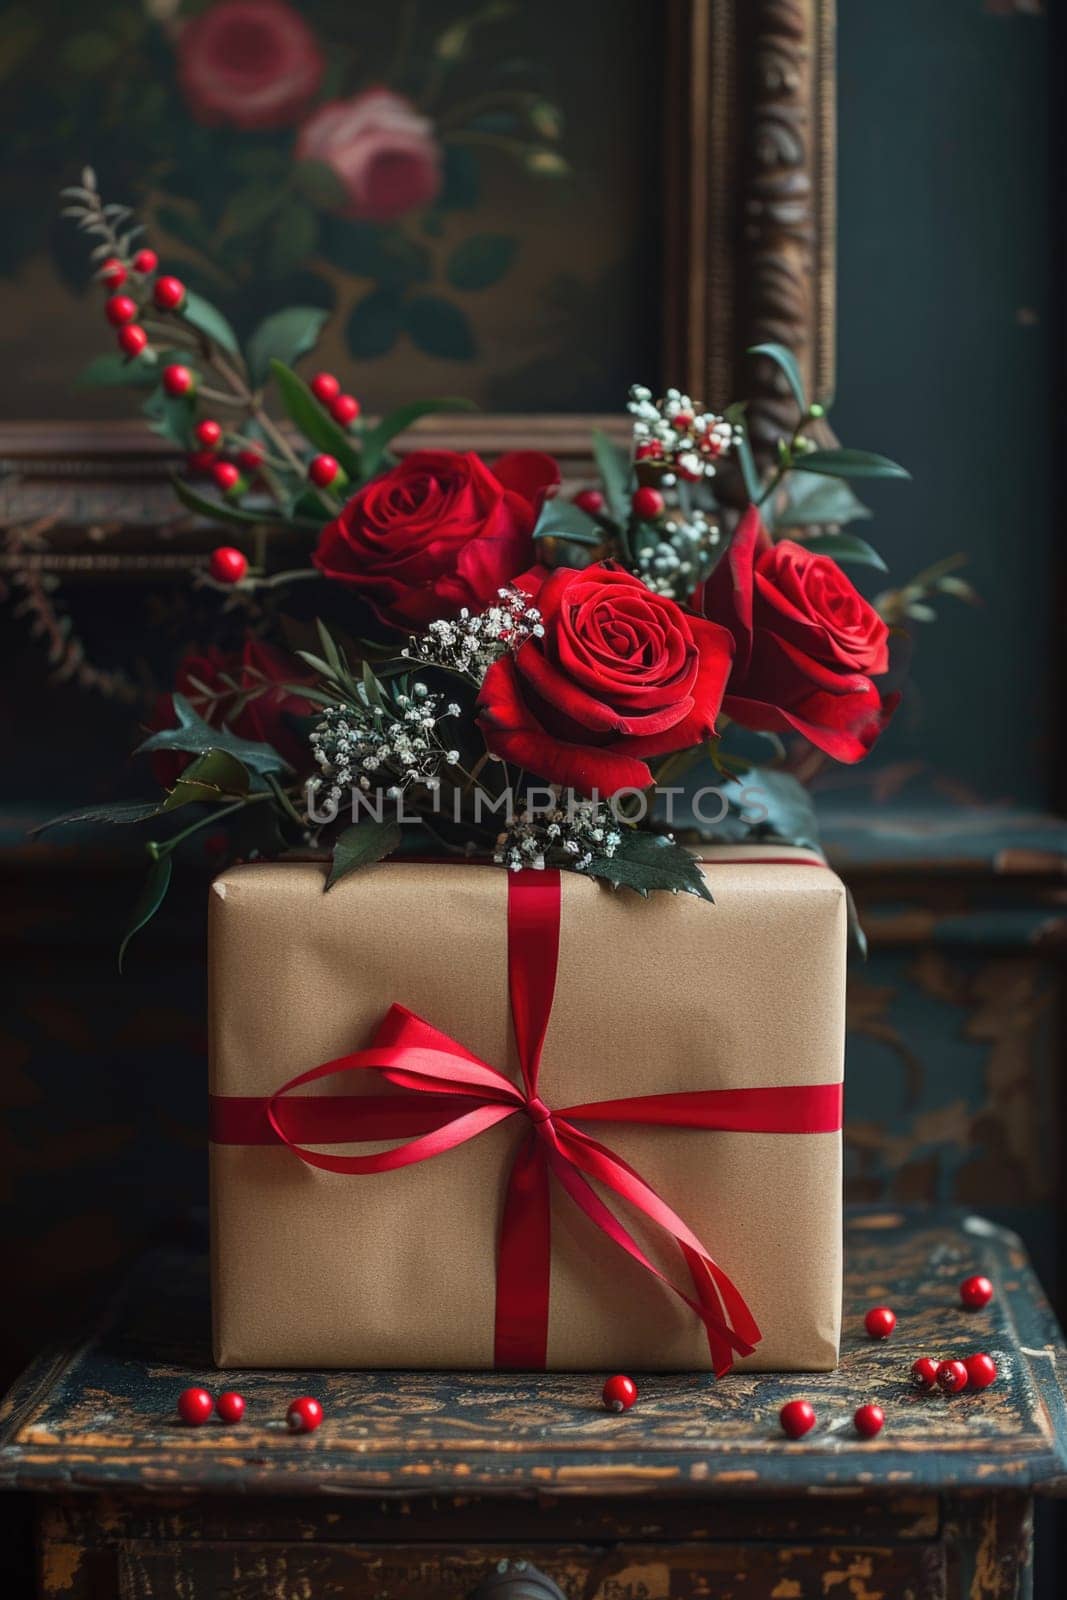 A gift elegantly wrapped in brown paper and adorned with a red ribbon.